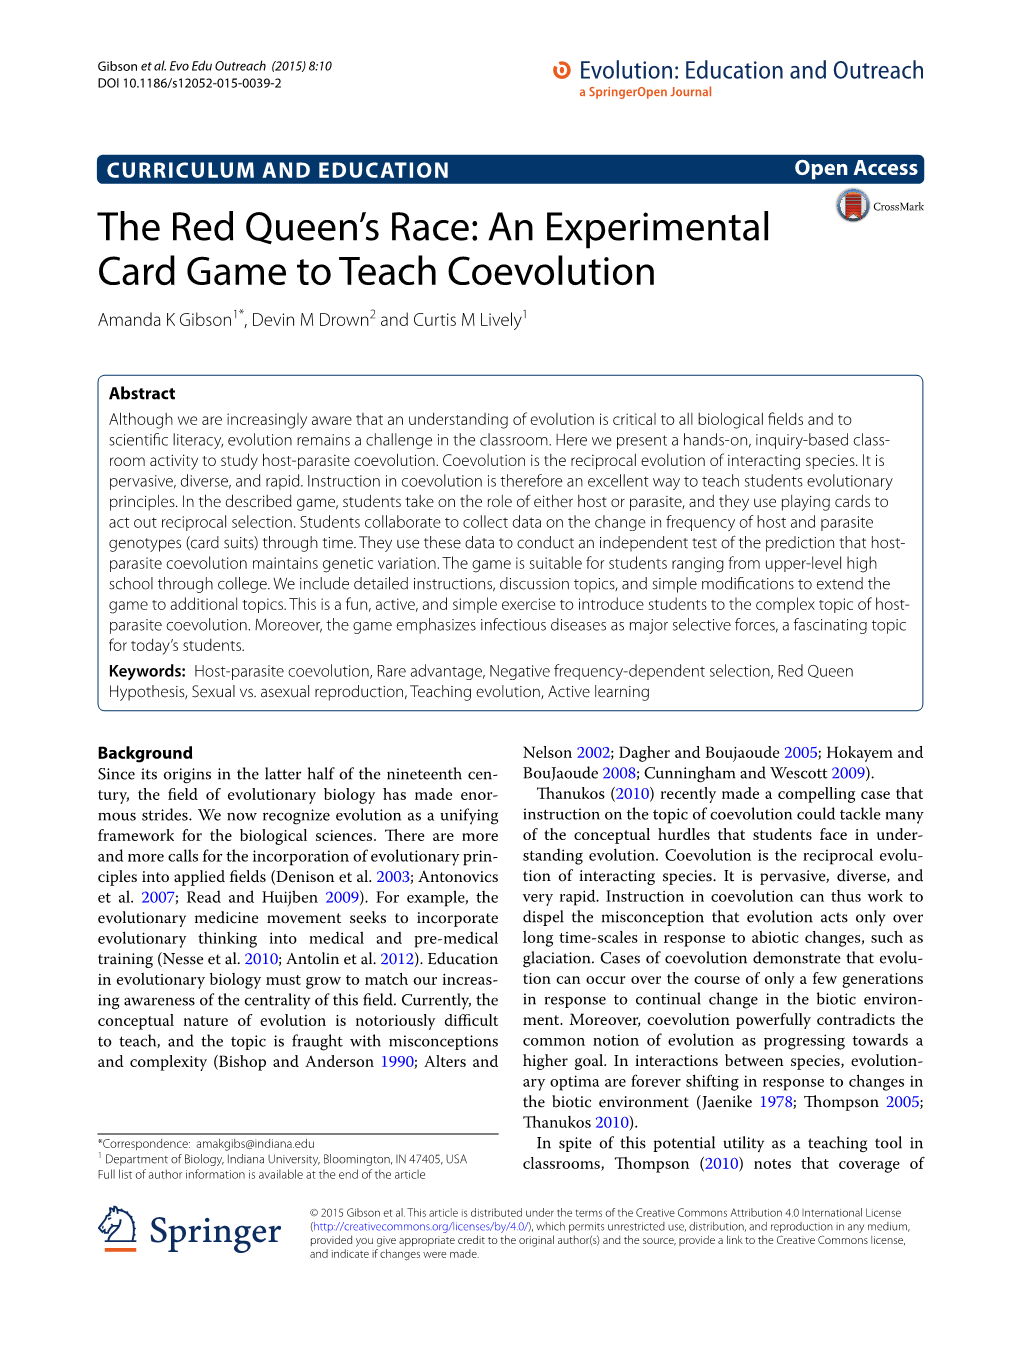 The Red Queen's Race: an Experimental Card Game to Teach Coevolution